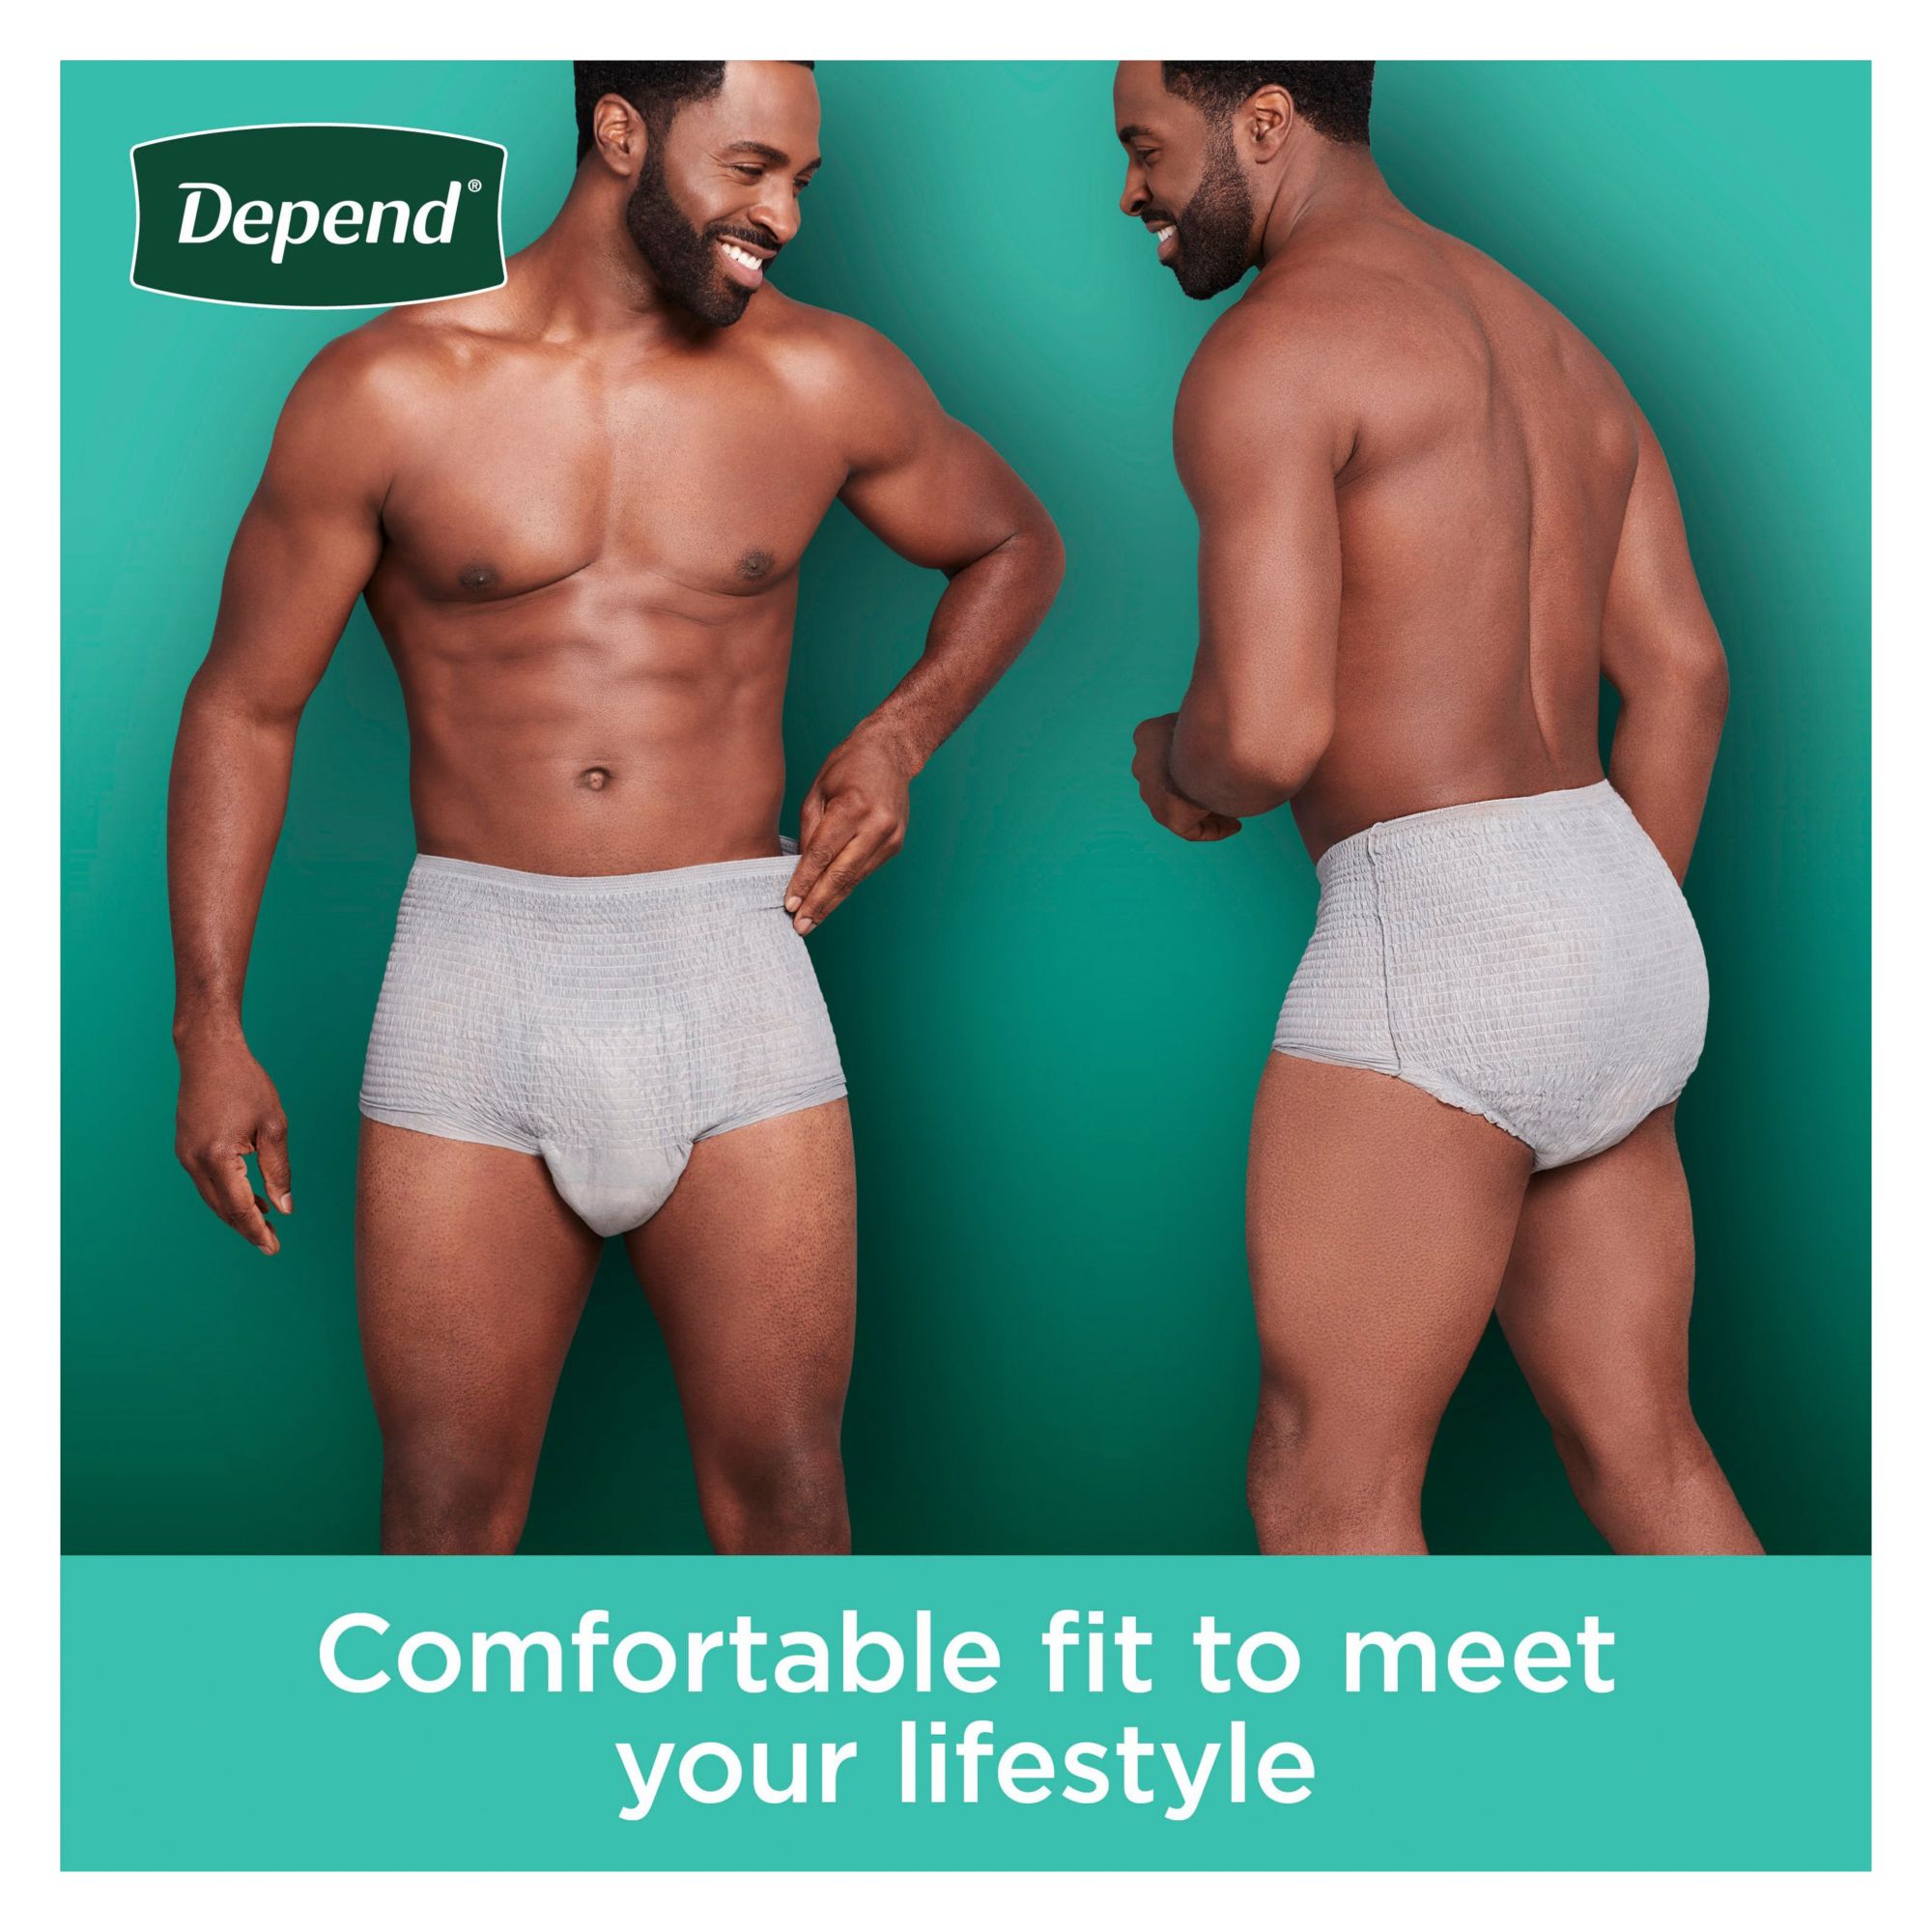 Depend Protection Plus Ultimate Underwear for Women, Large 84 • Price »